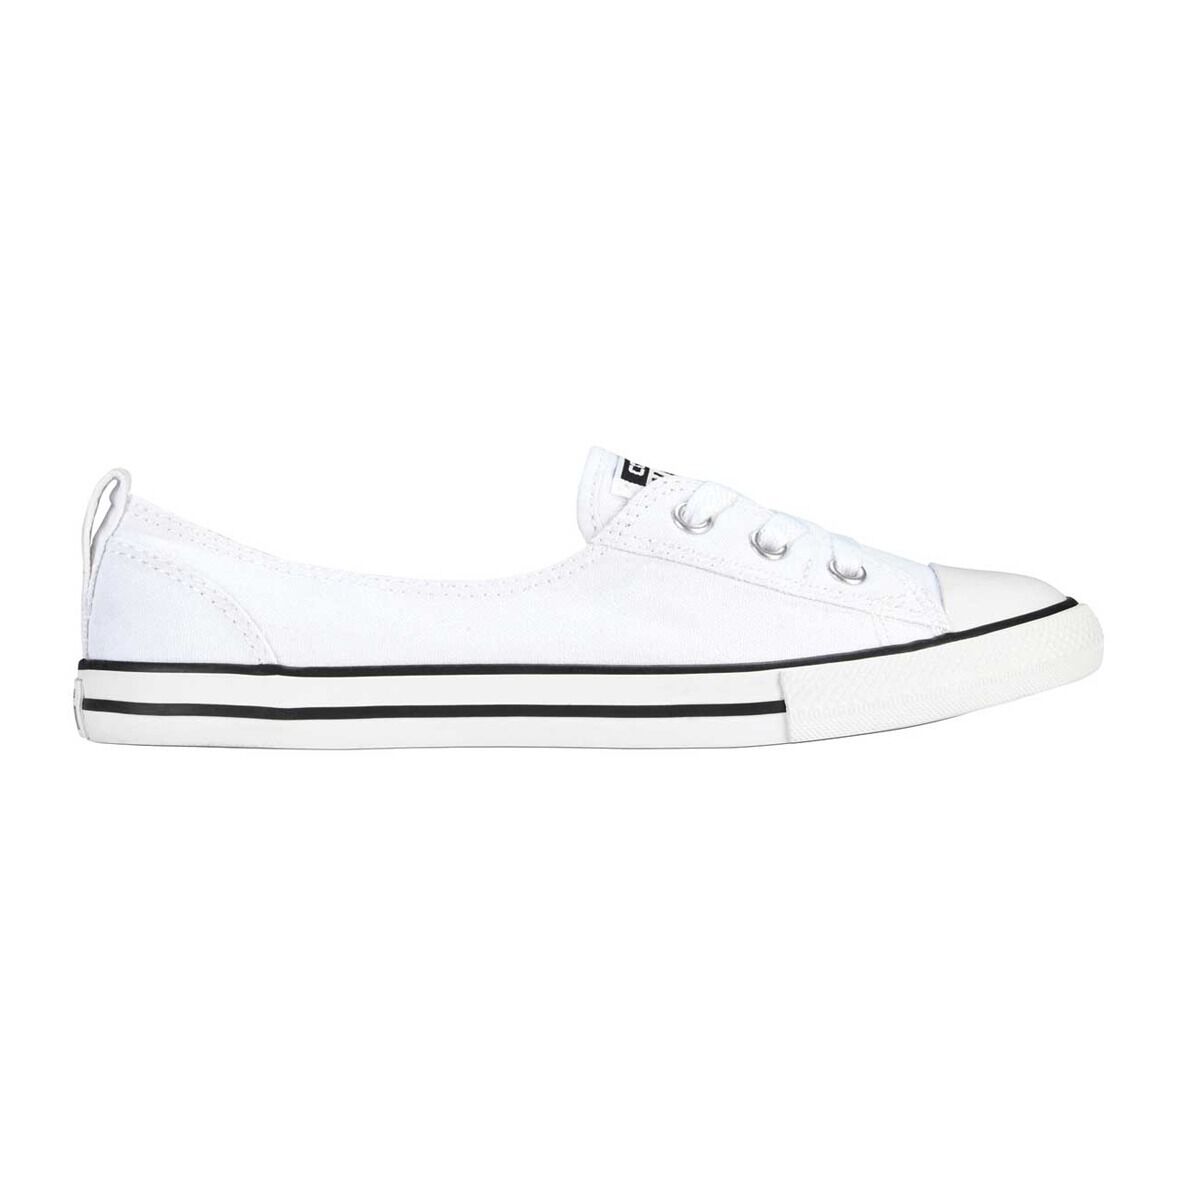 all star casual shoes